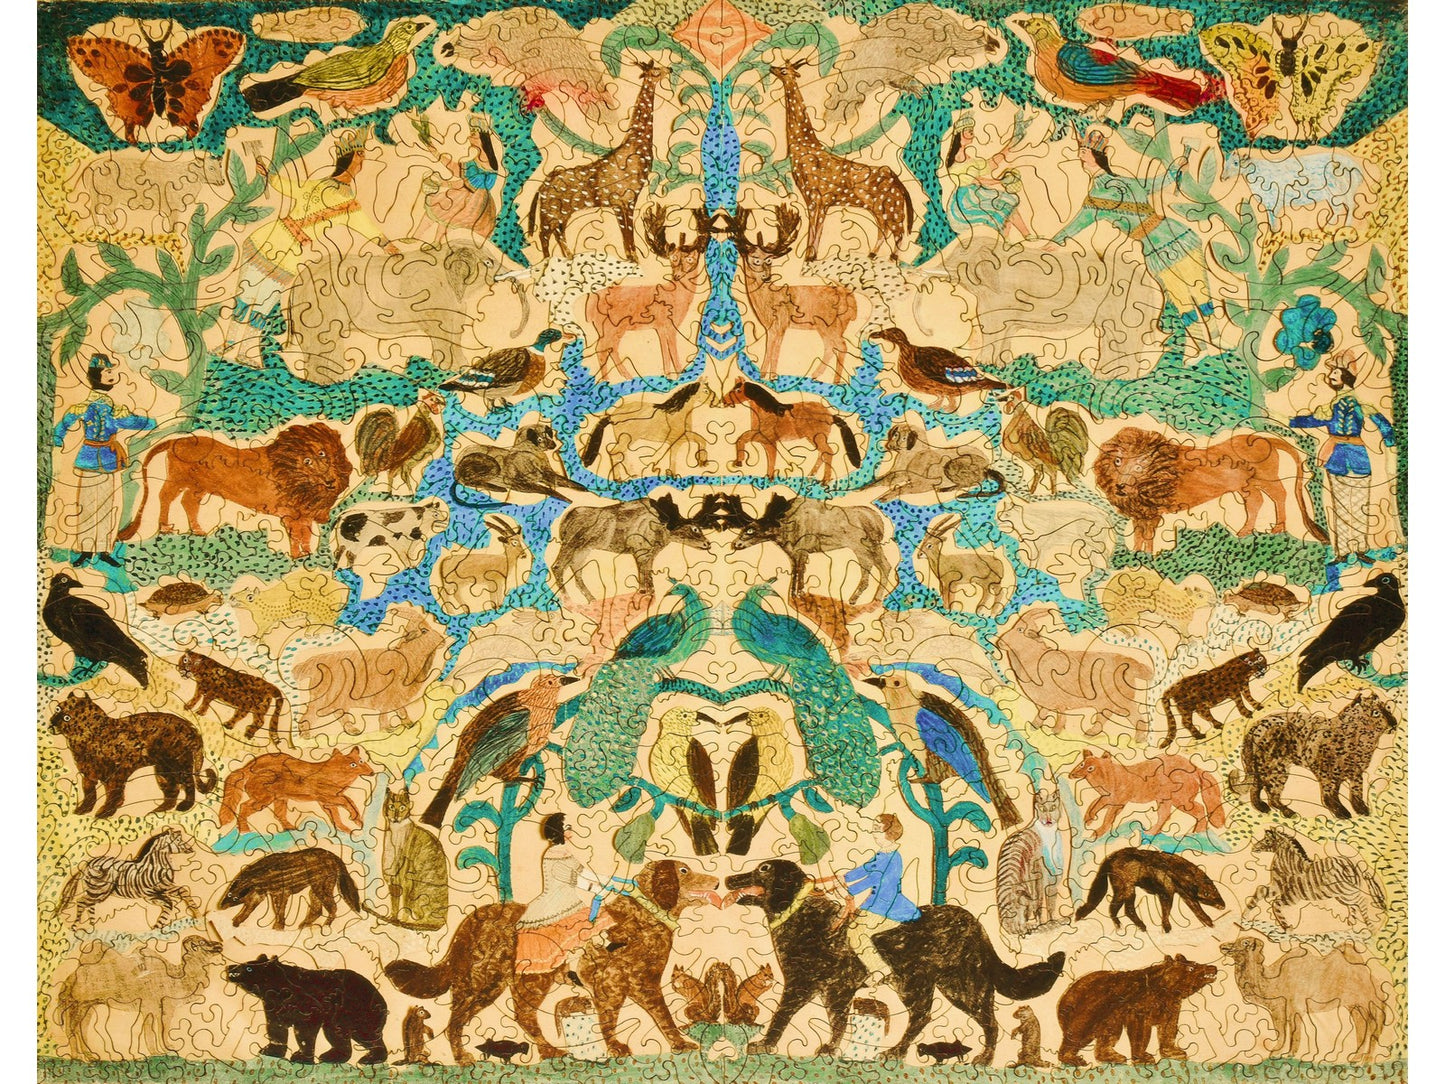 The front of the puzzle, Cutout of Animals, which shows a mirror image of a menagerie of animals.